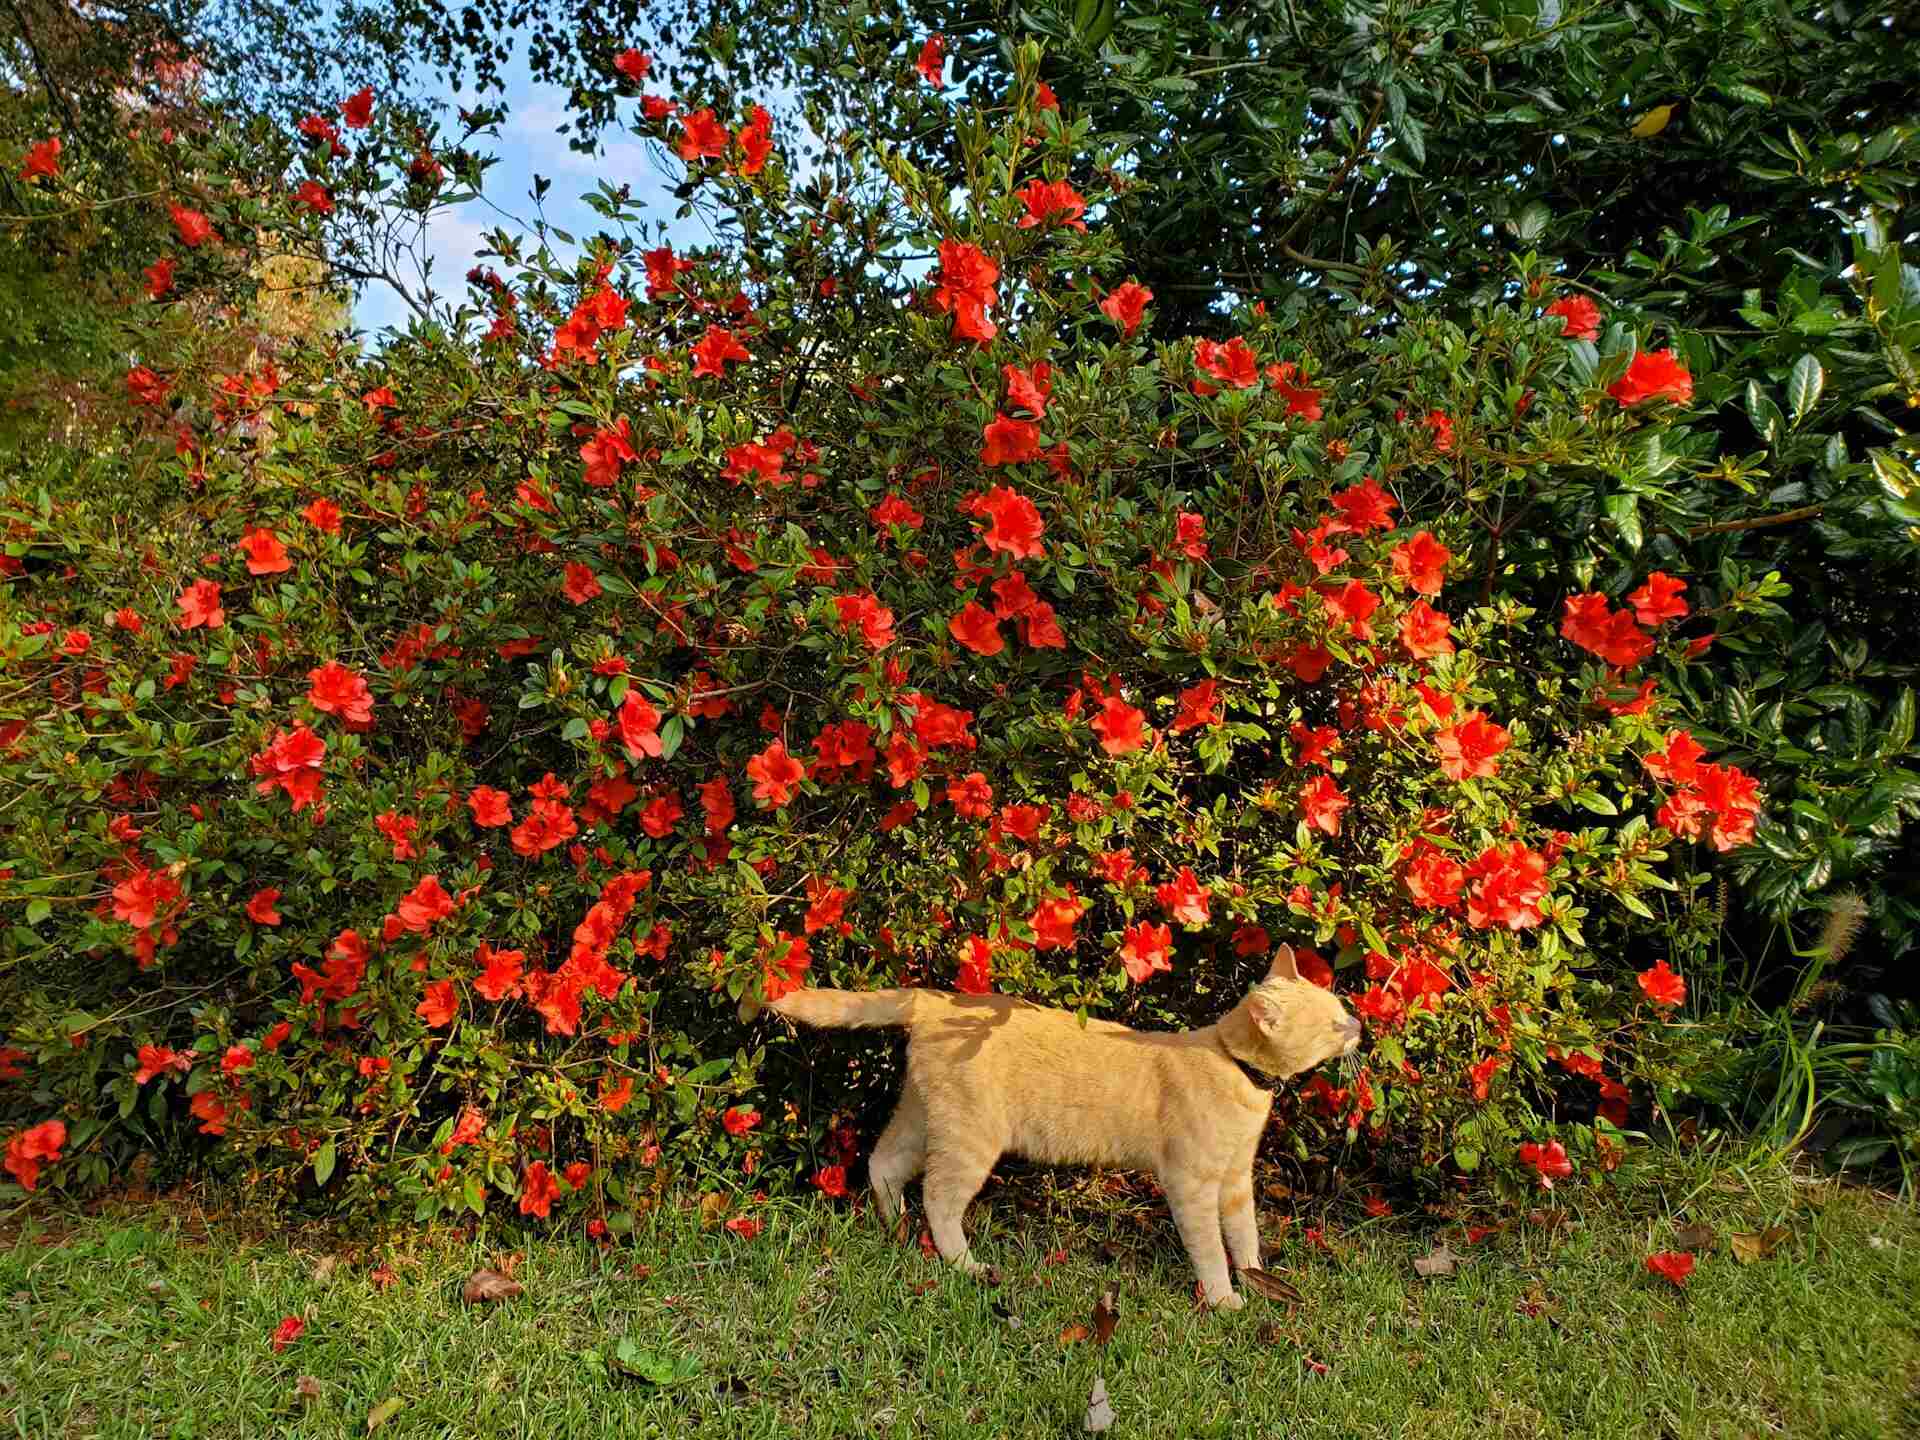 A brown cat wearing a collar sniffing at a bush full of red flowers